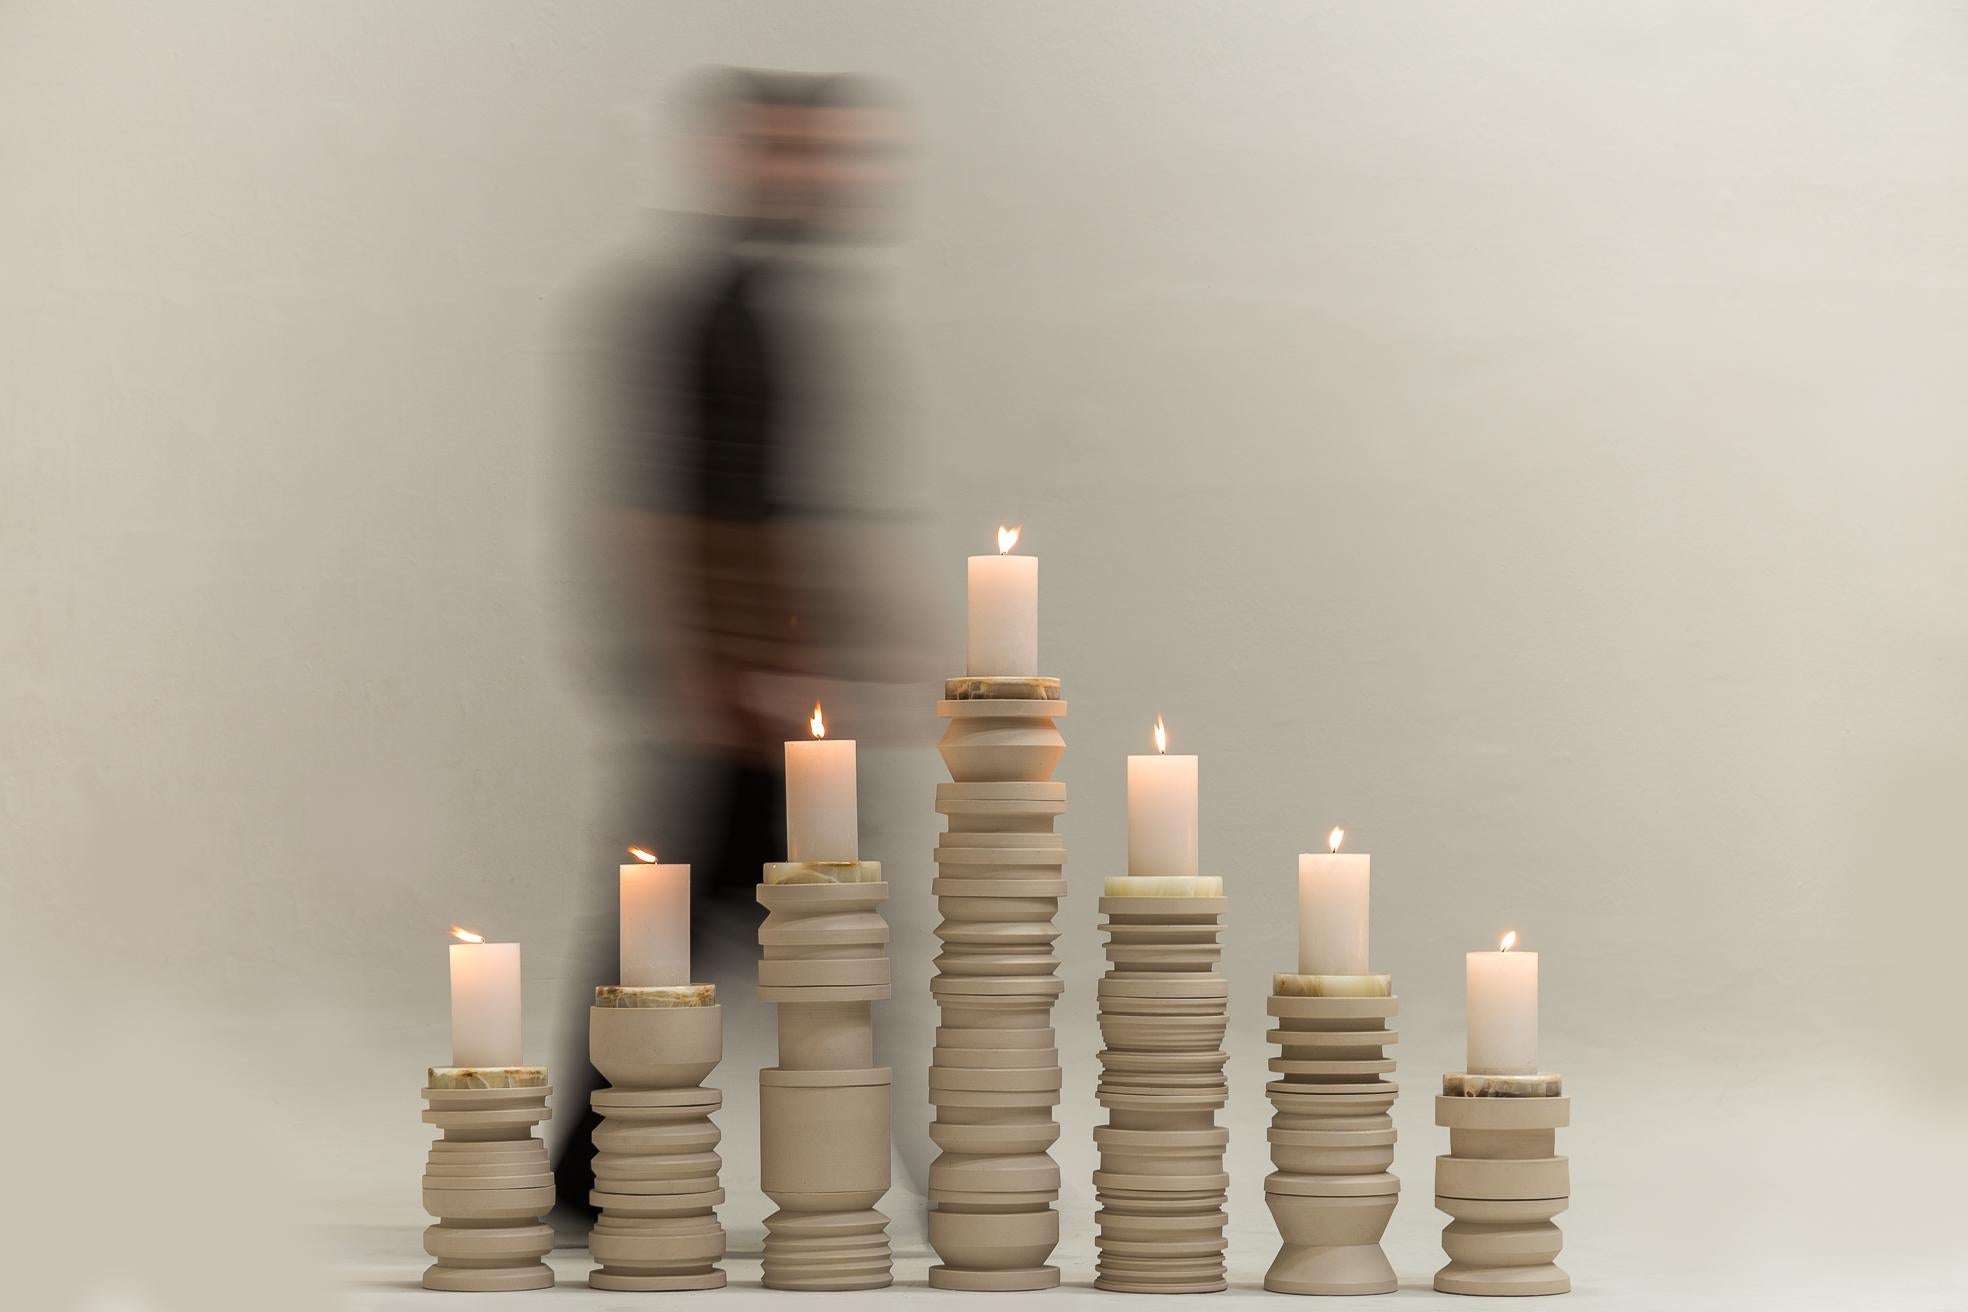 Cabria candleholders by Cristián Mohaded & Santiago Lena
Limited edition
Dimensions: 
25.8 cm H x 18.5 cm
36.4 cm H x 18.5 cm
67.3 cm H x 18.5 cm
97.2 cm H x 18.5 cm
61.2 cm H x 18.5 cm
40.6 cm H x 18.5 cm
30.5 cm H x 18.5 cm
Materials: